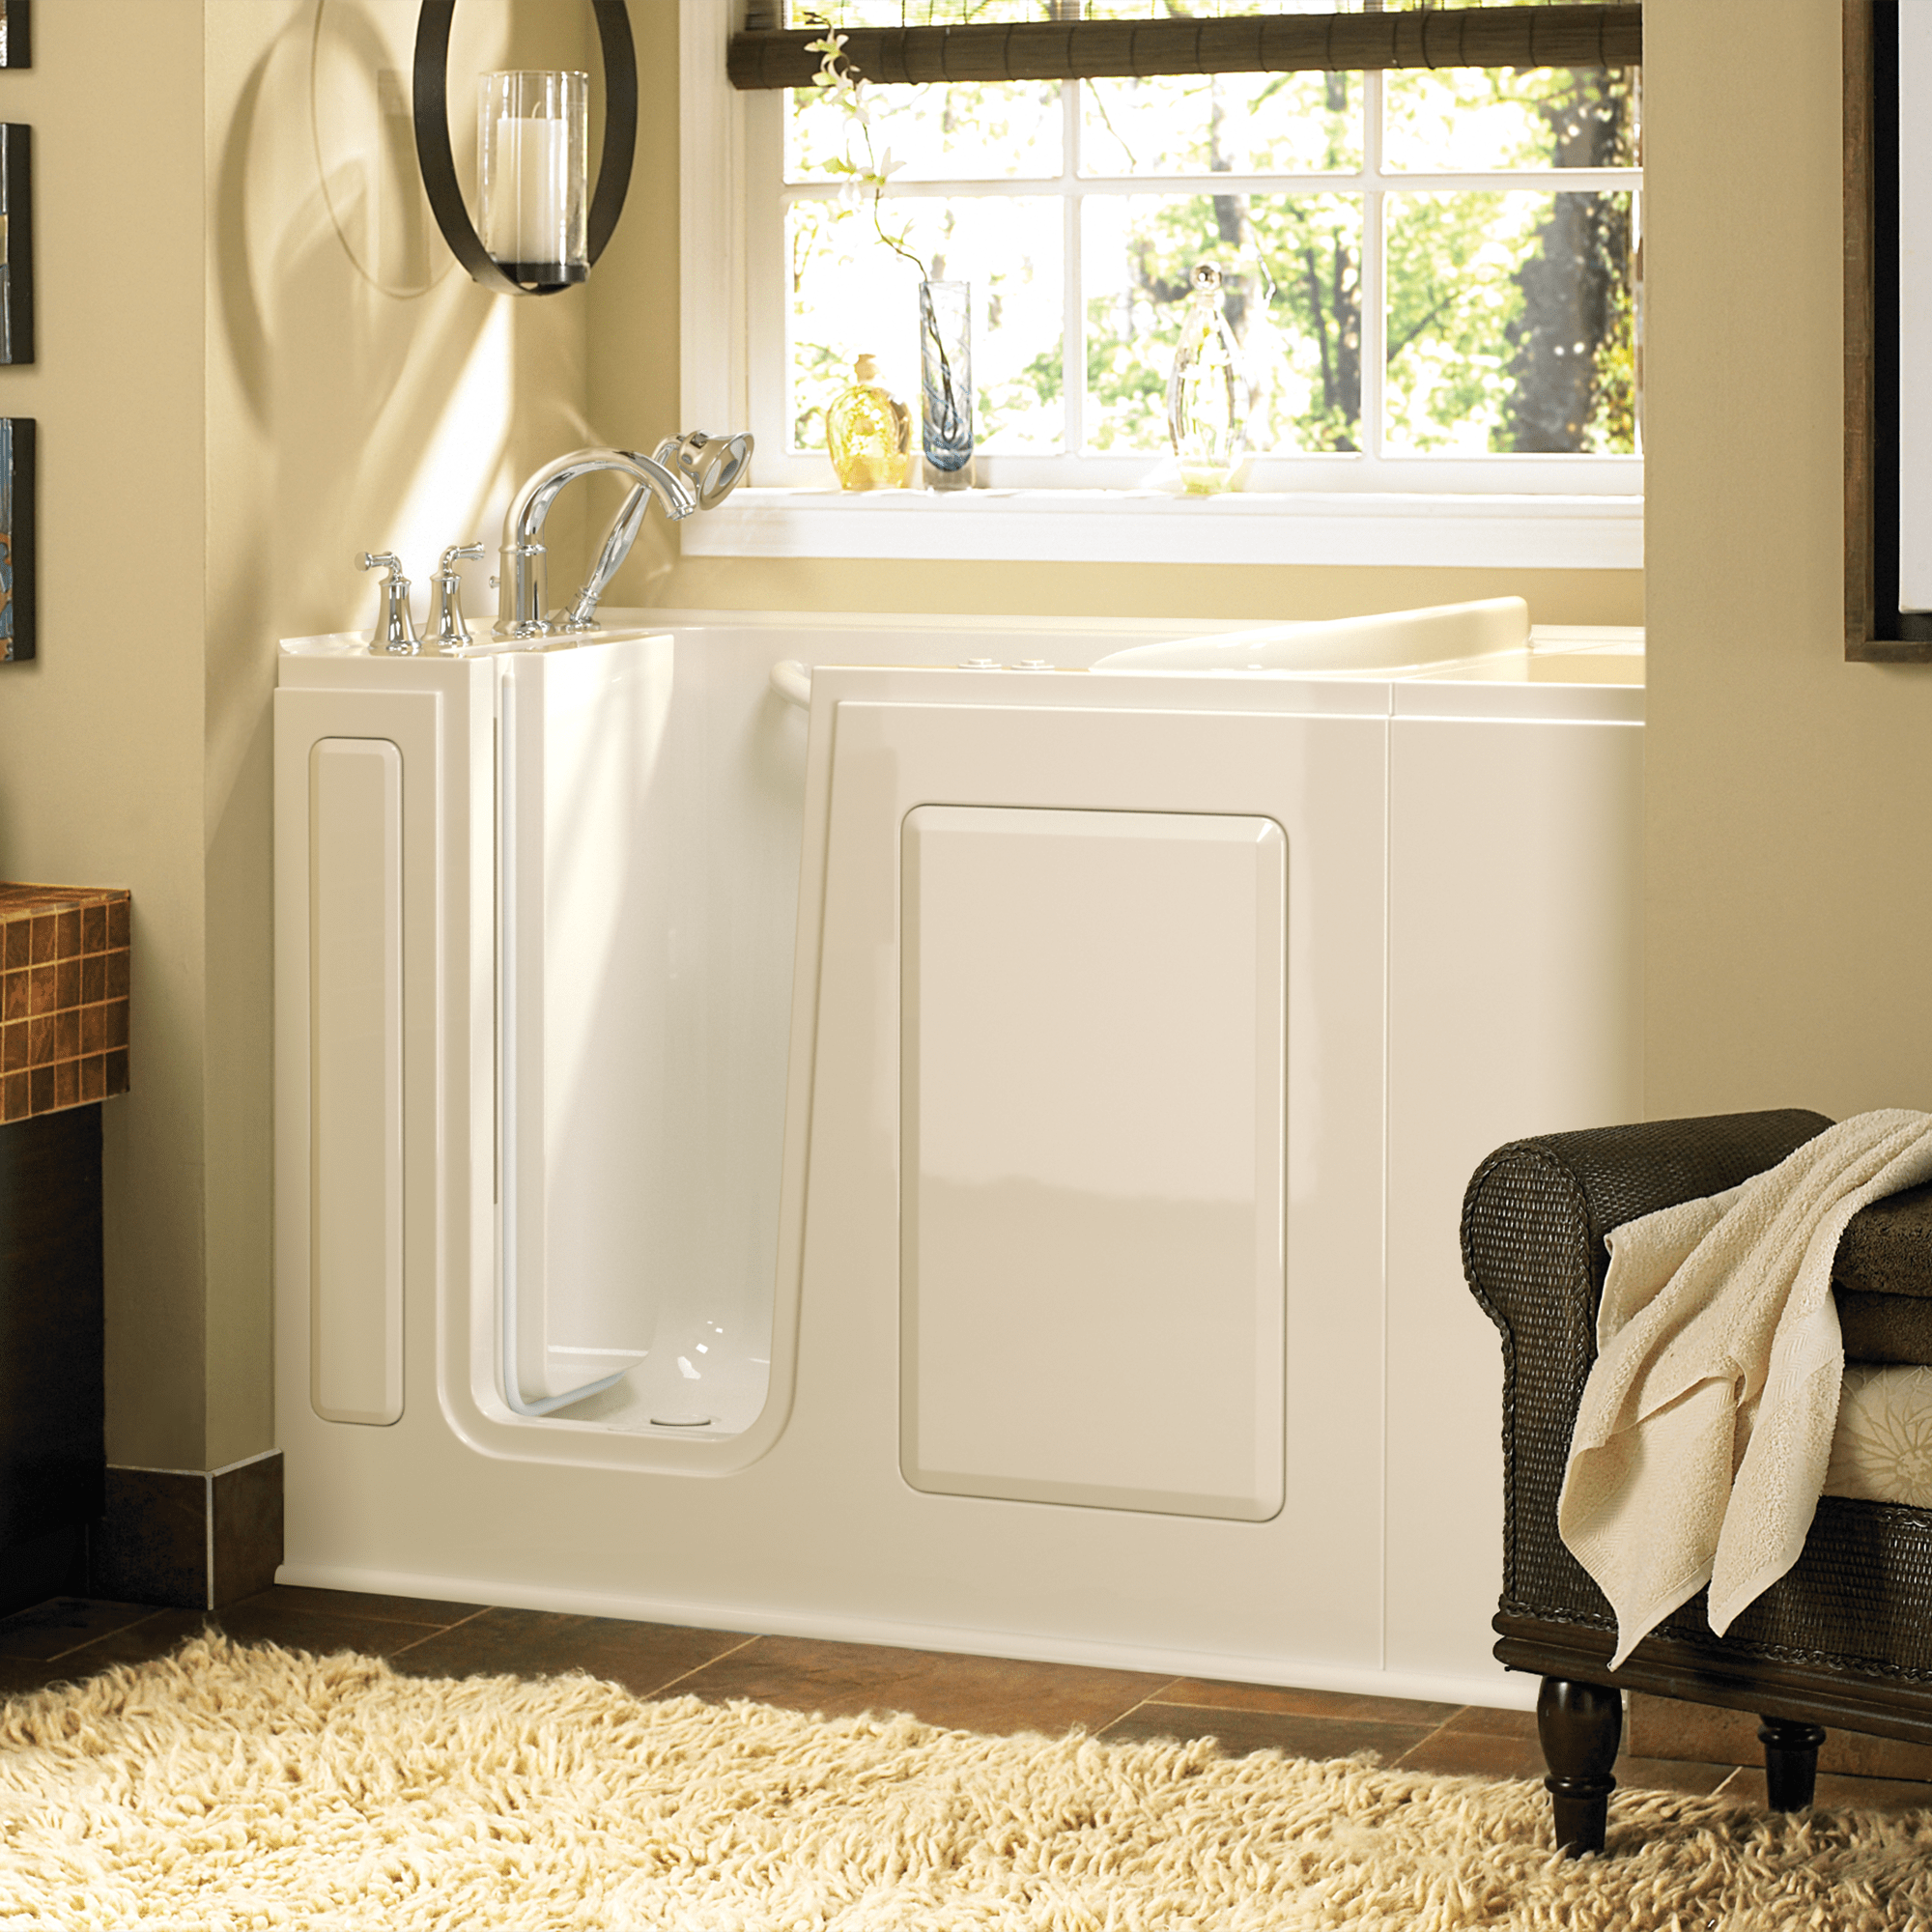 Gelcoat 28x48-Inch Walk-in Bathtub with Air Spa System - Left Hand Door and Drain